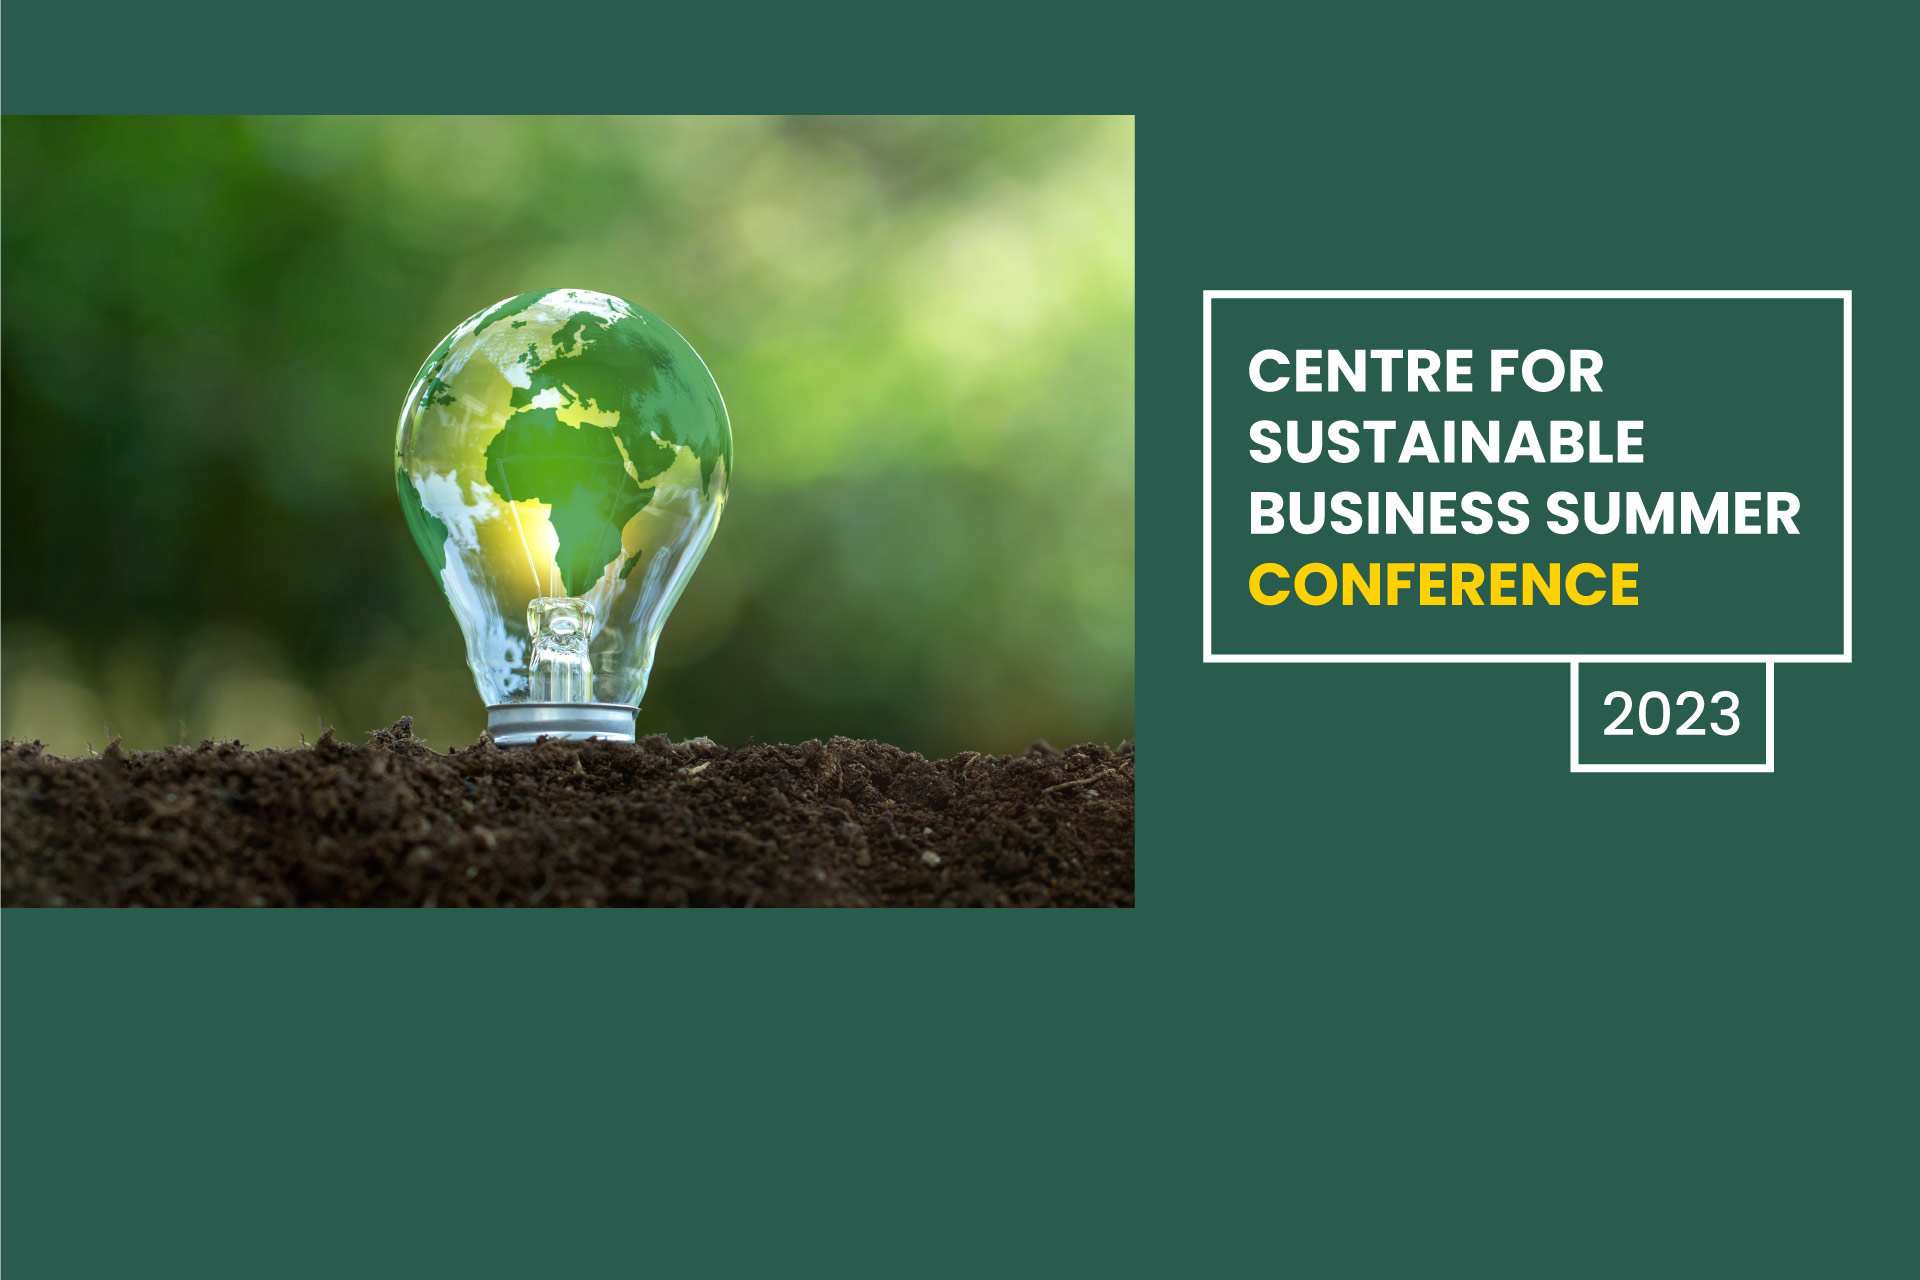 Centre for Sustainable Business Summer Conference 2023